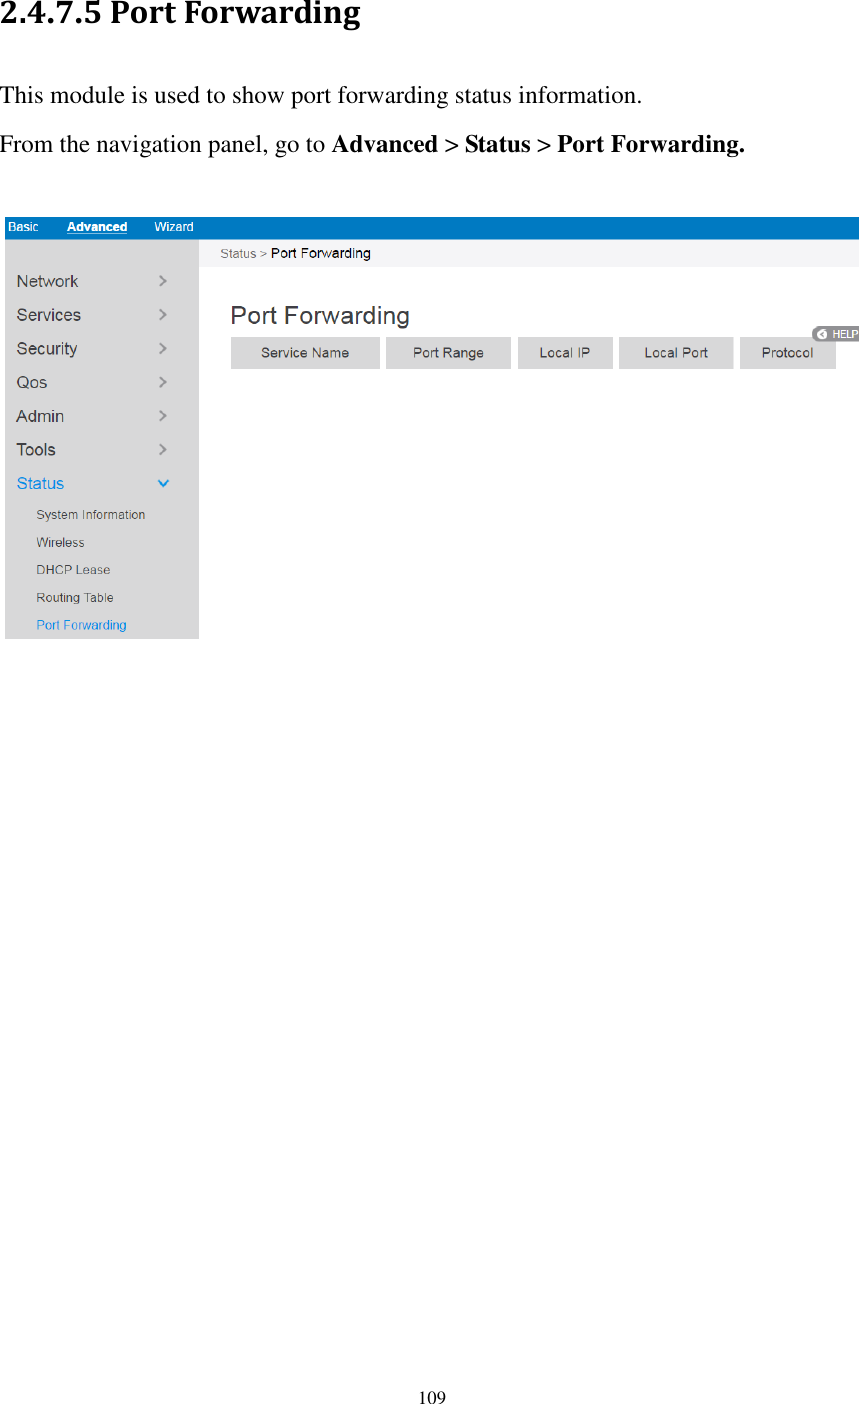  109  2.4.7.5 Port Forwarding This module is used to show port forwarding status information. From the navigation panel, go to Advanced &gt; Status &gt; Port Forwarding.   